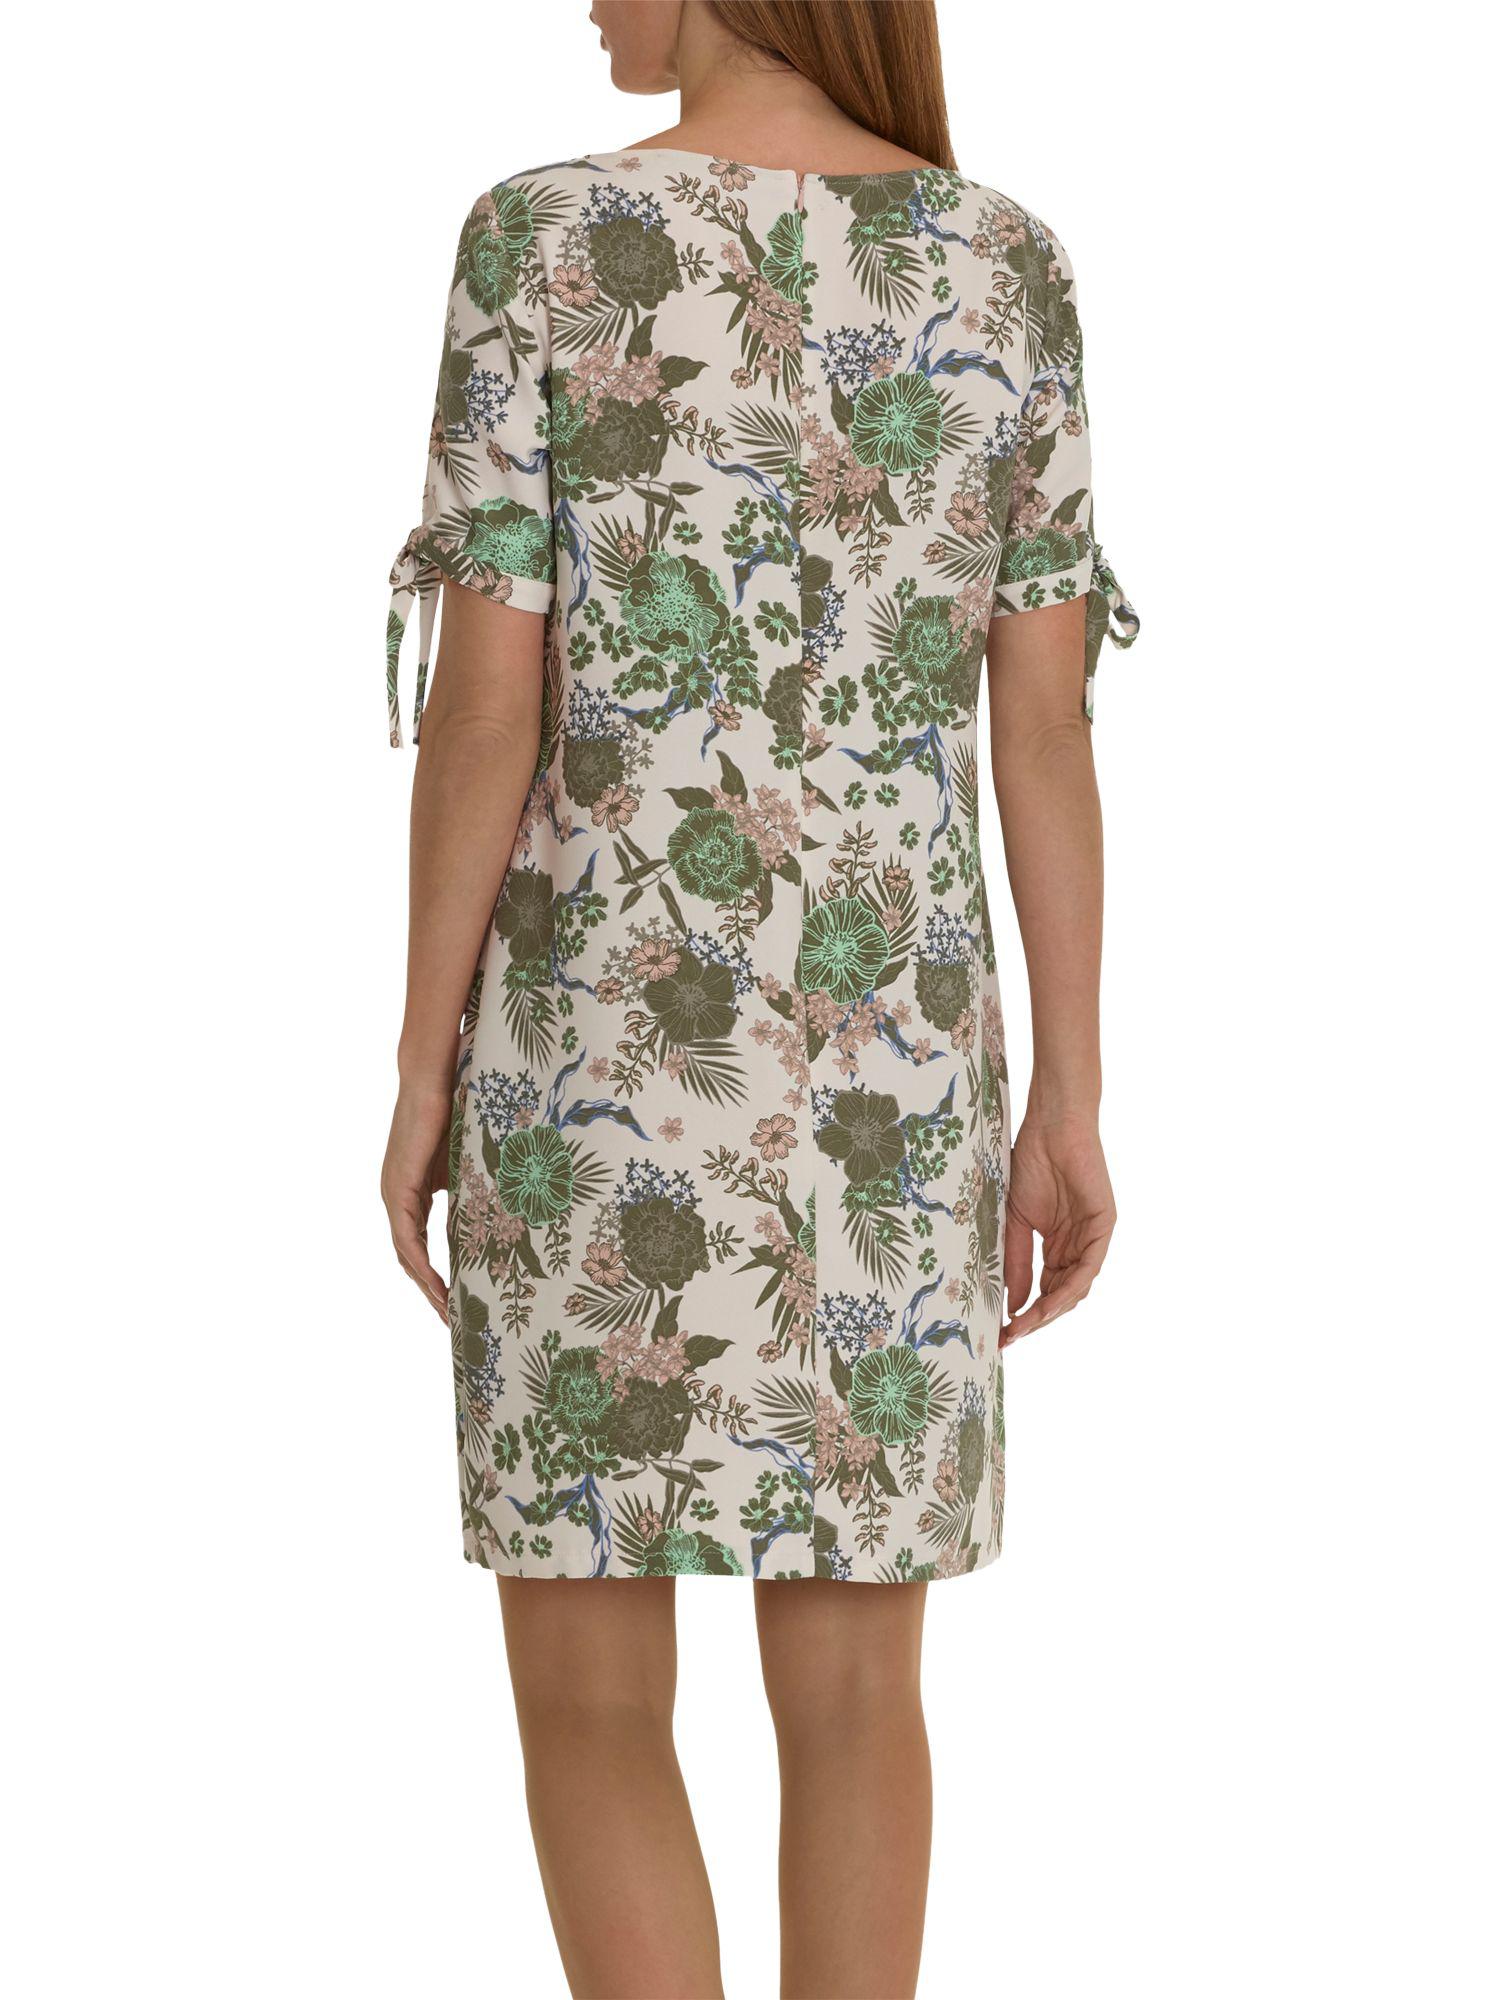 betty barclay synthetic floral print dress - lyst